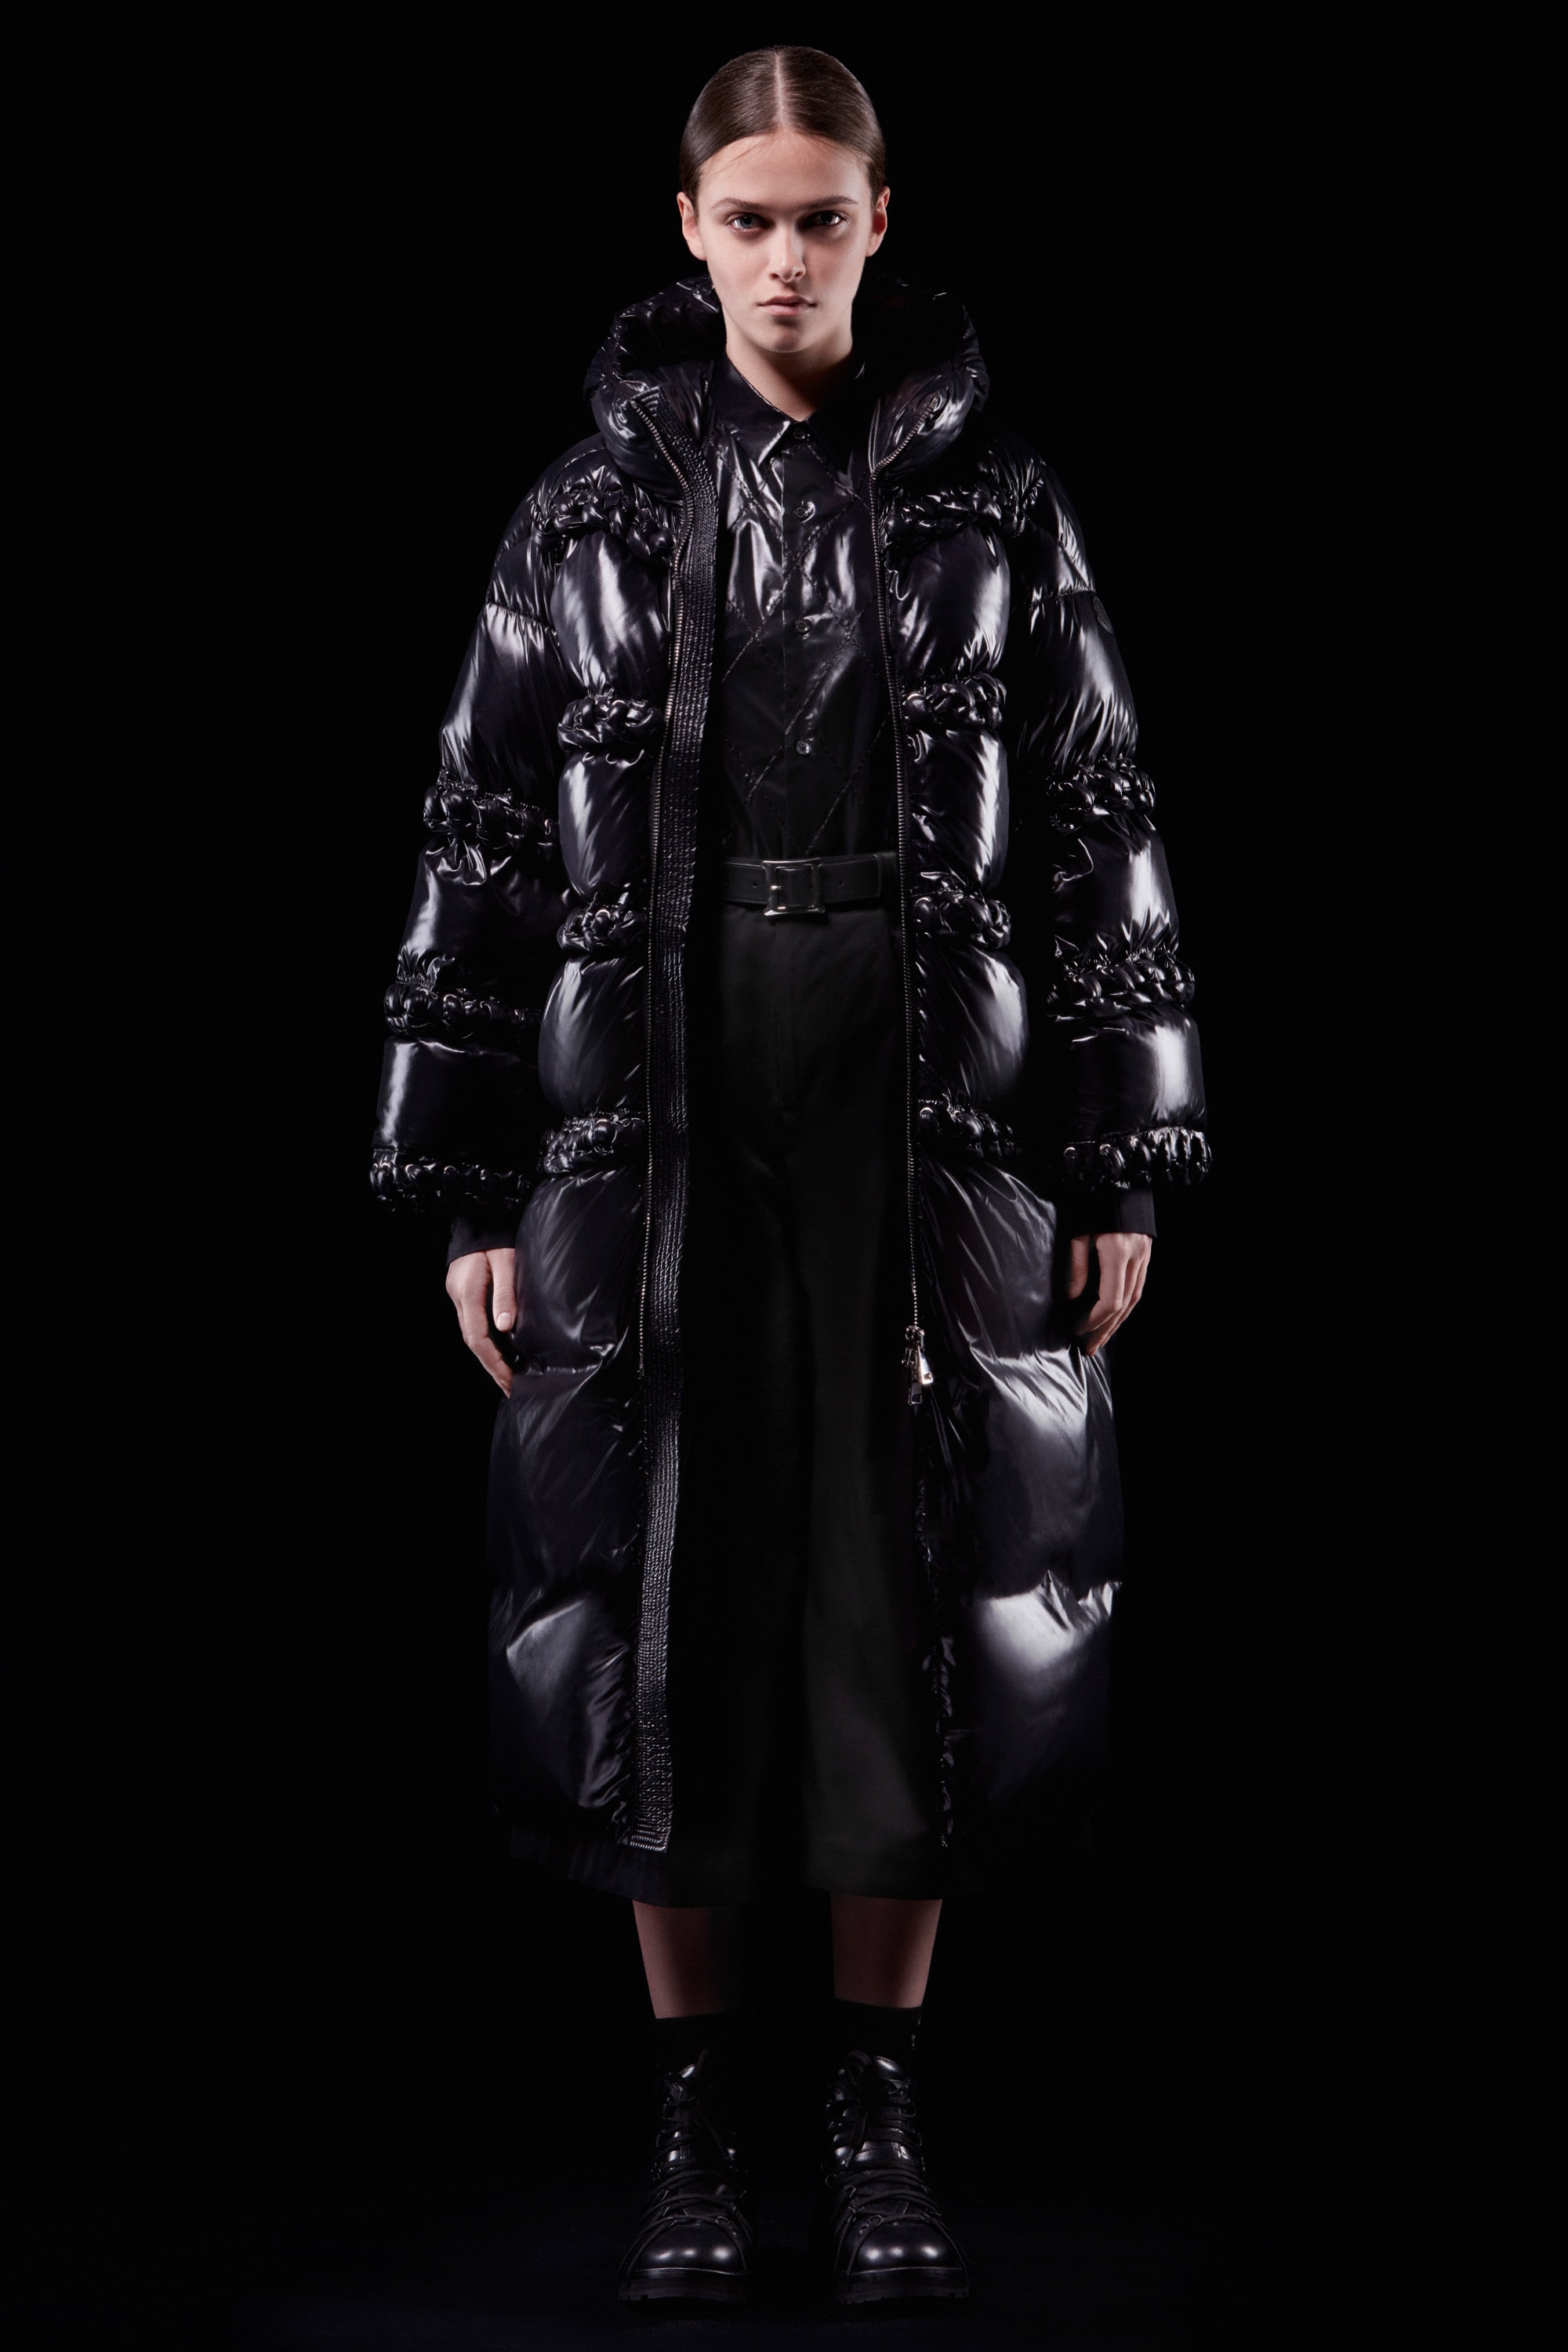 Moncler Noir Kei Ninomiya collaboration 6 genius lookbook collection full closer look official july 25 2018 drop release date launch buy purchase sale sell dover street market